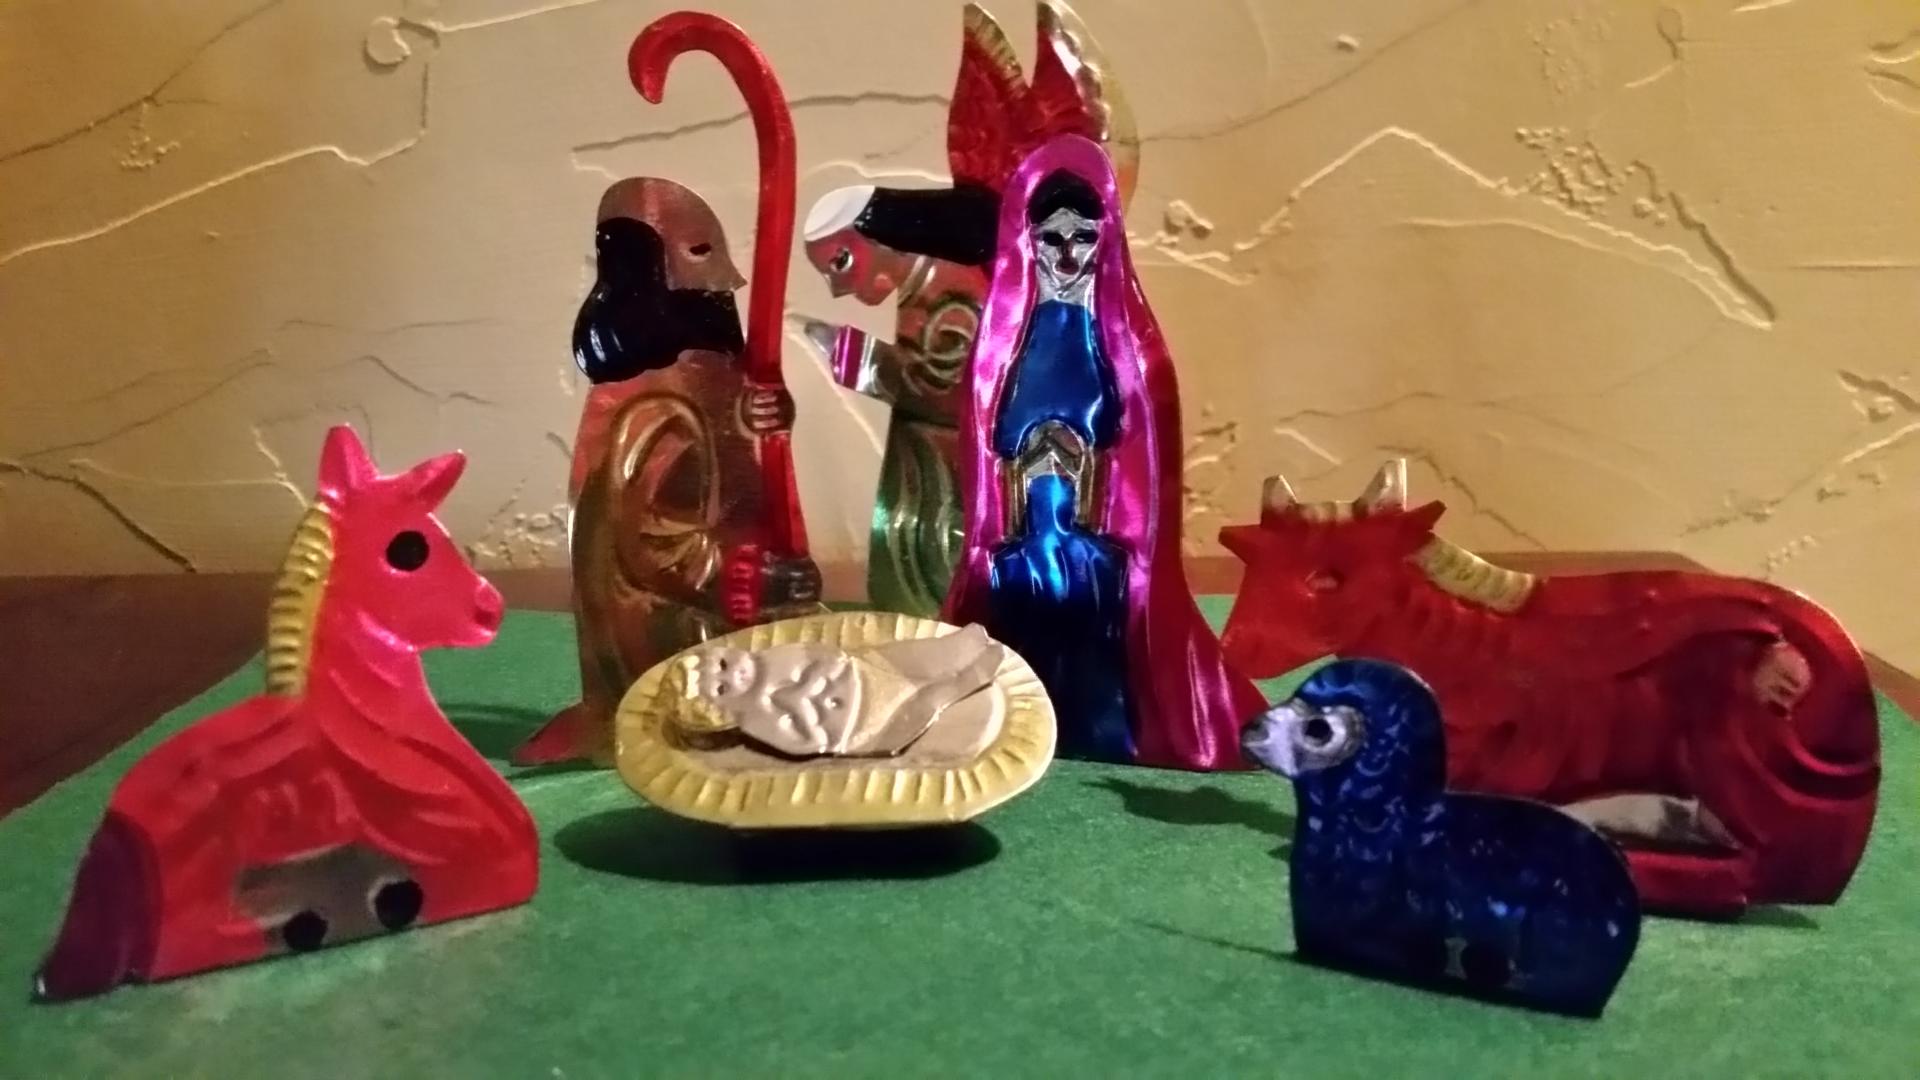 Nativity set from a border town in Mexico.